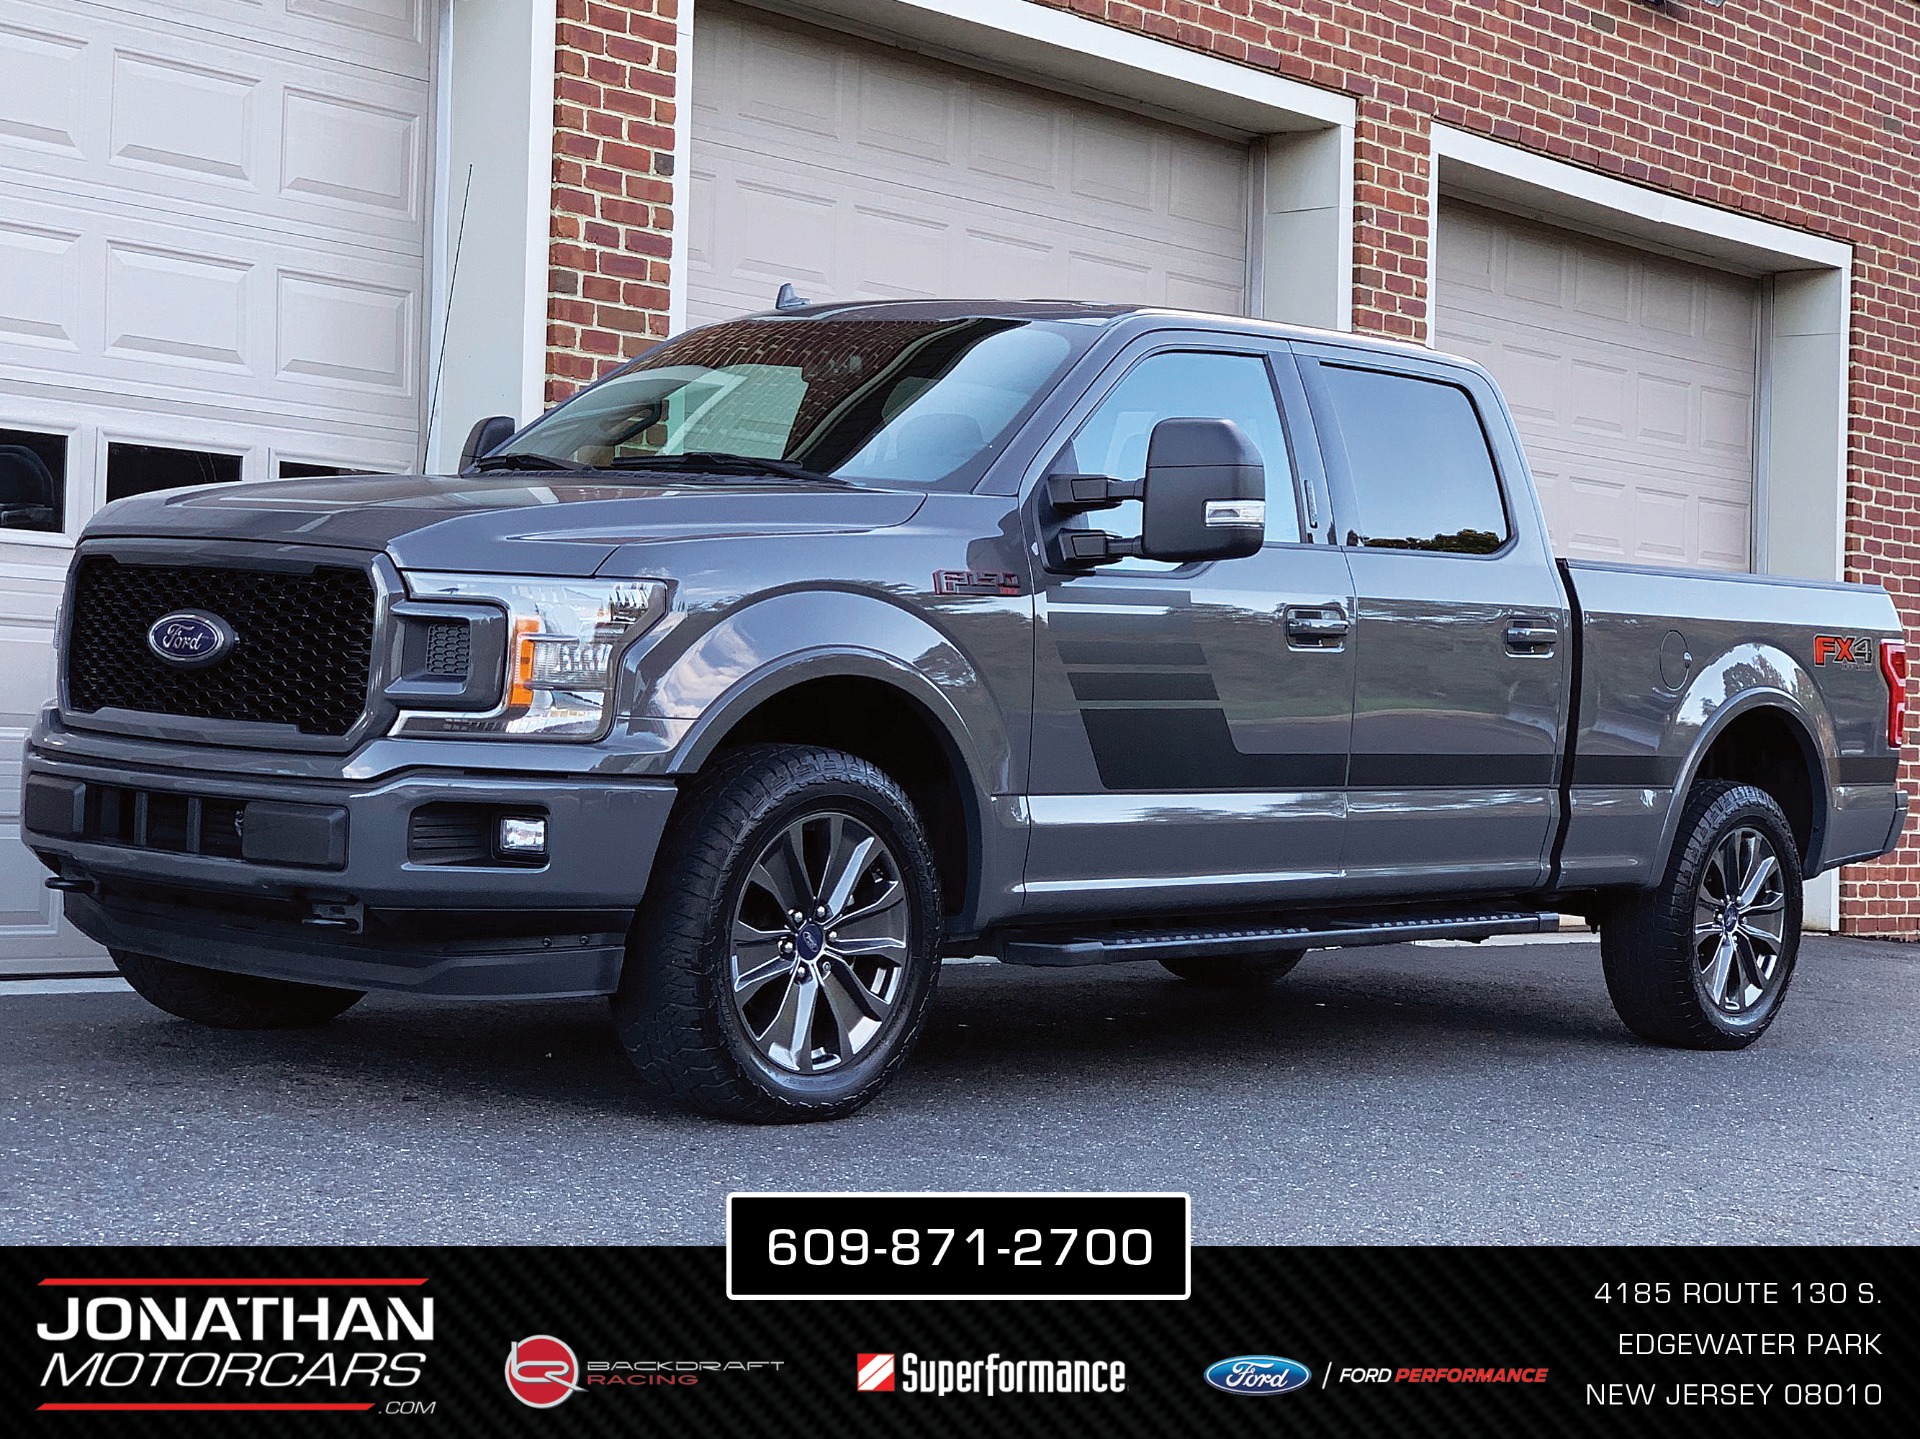 2018 Ford F-150 XLT Stock # E28341 for sale near Edgewater Park, NJ 2018 Ford F 150 Xlt 2.7 Ecoboost Towing Capacity